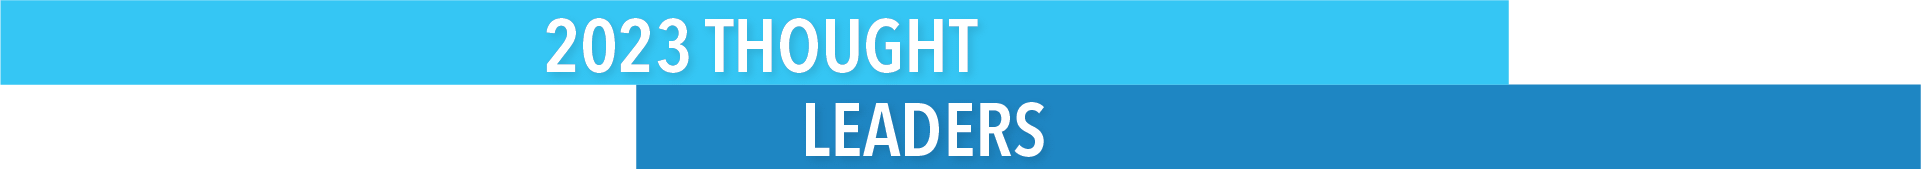 Event Thought Leaders